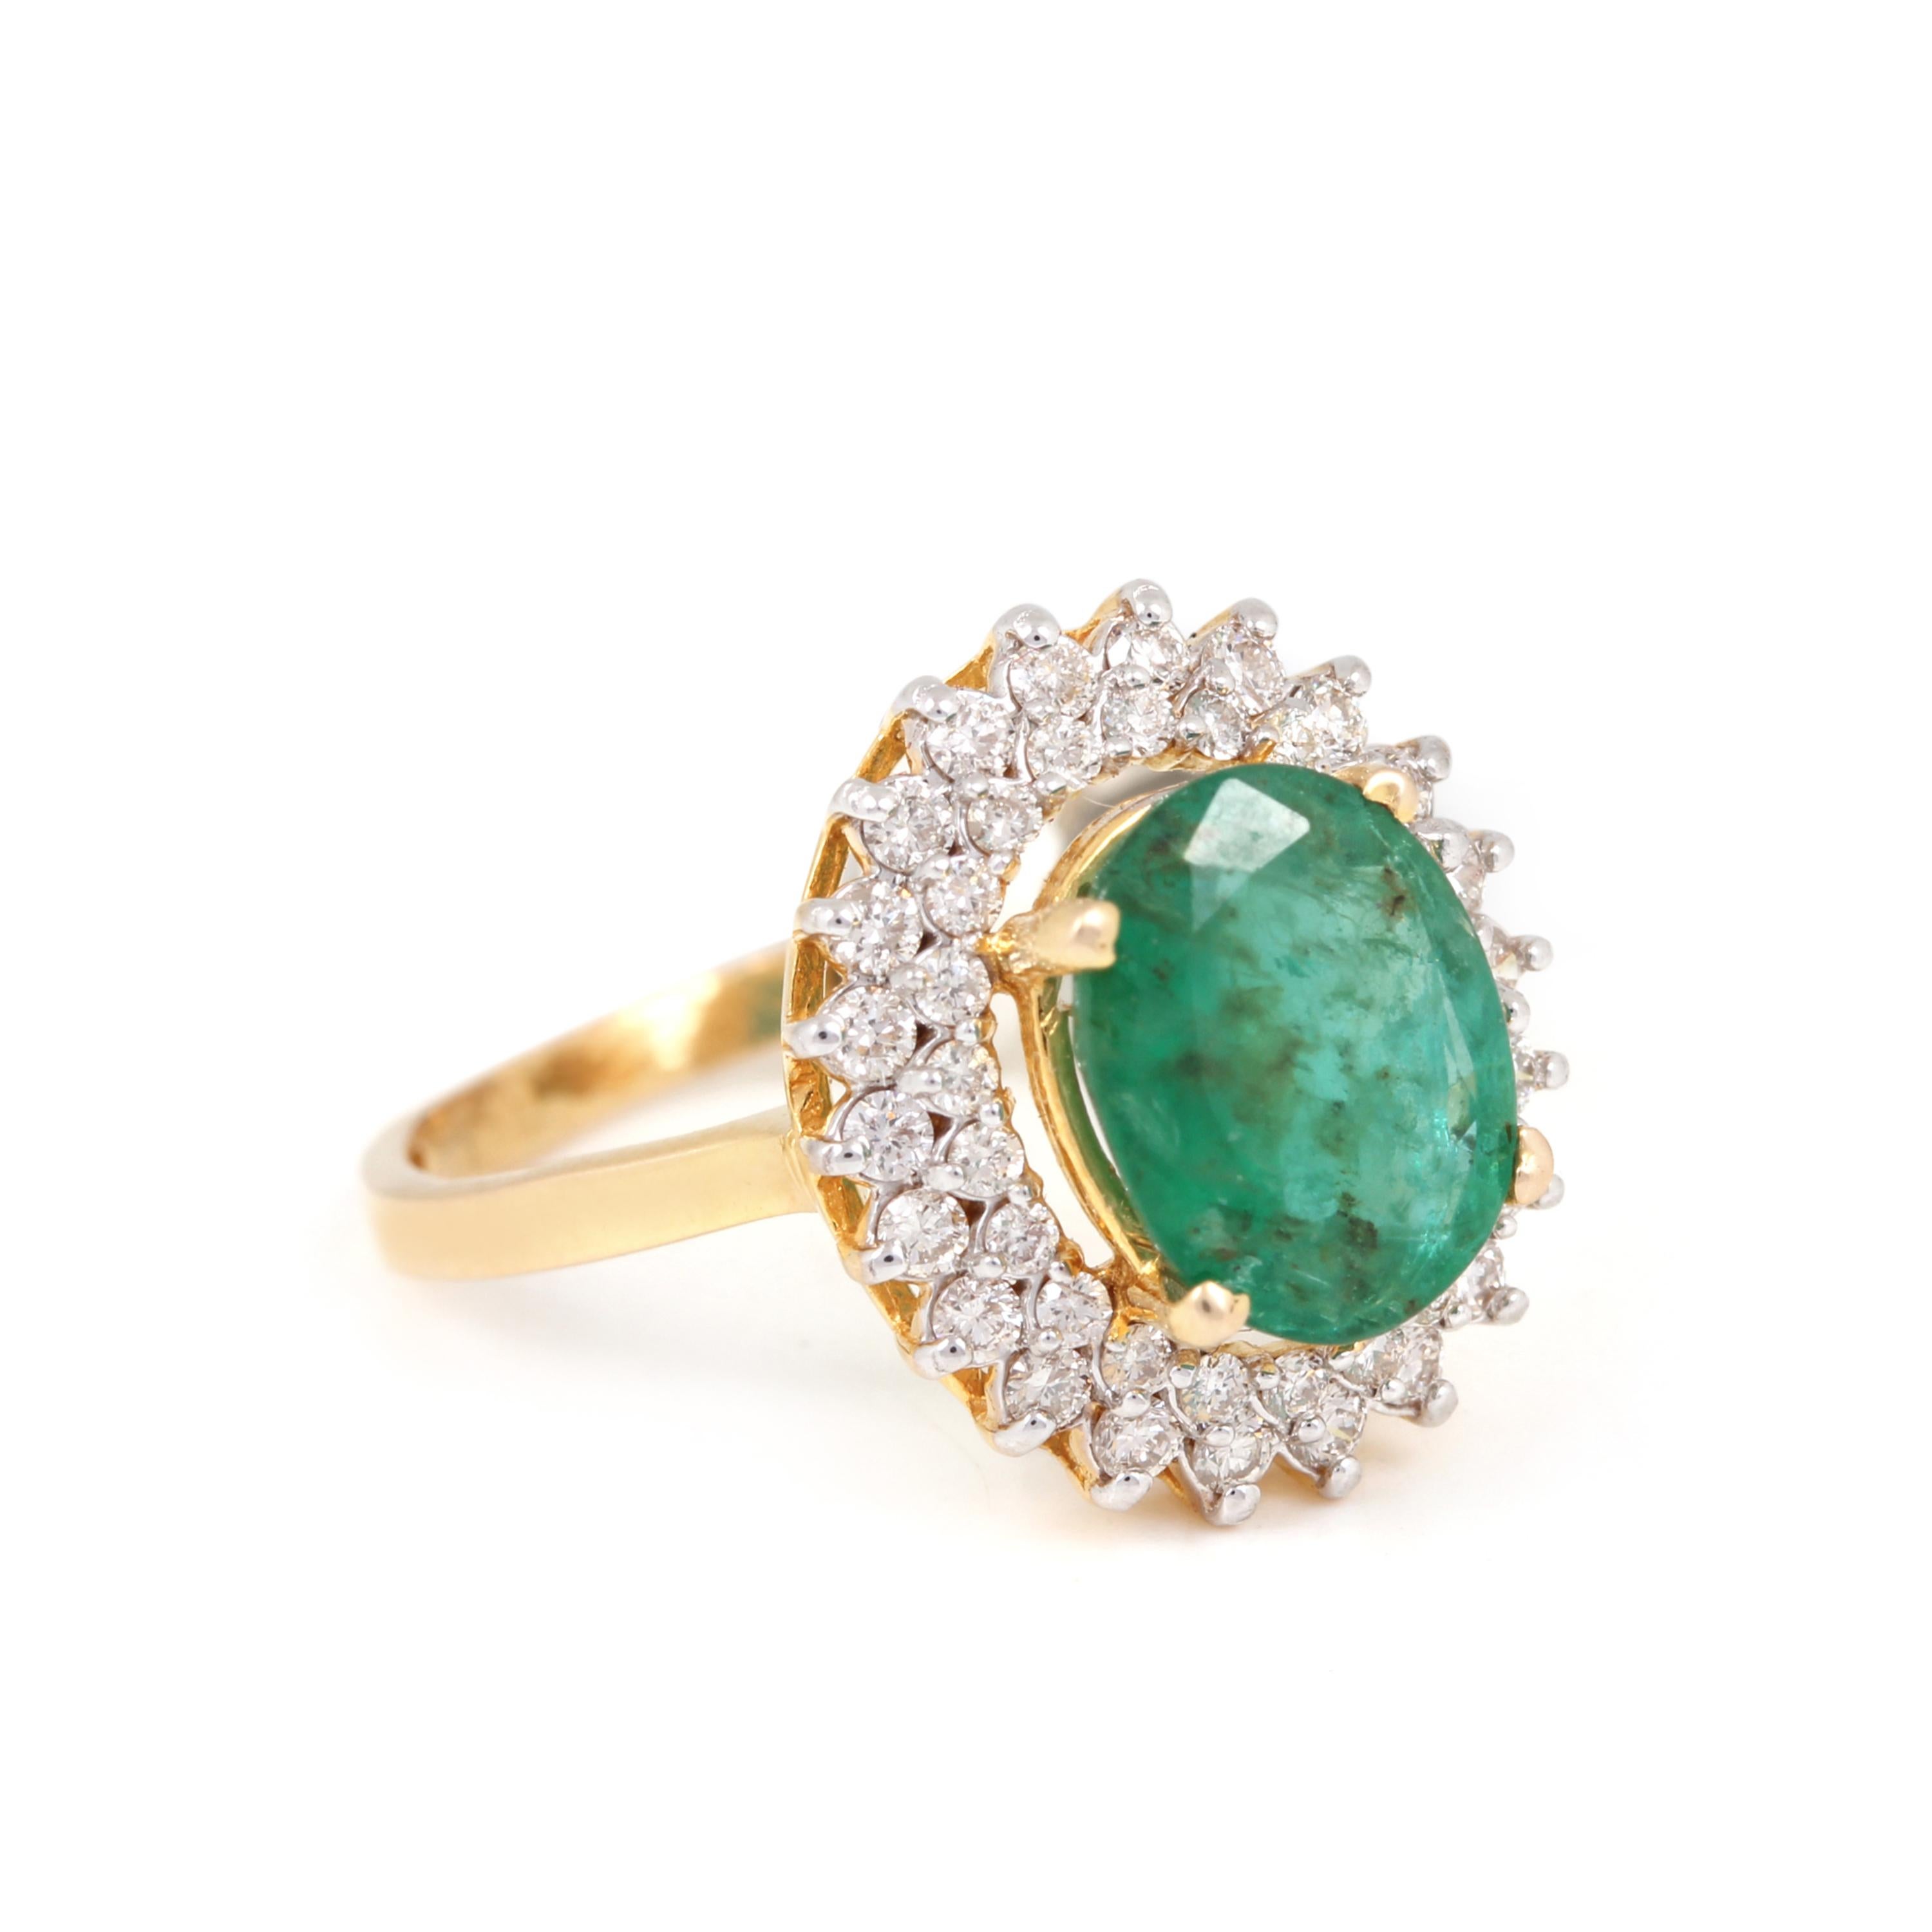 Antique Halo Natural Emerald Diamond Engagement Ring Yellow Gold Cocktail Ring

A stunning ring featuring IGI/GIA Certified 0.97 Carat Natural Emerald and 0.61 Carat of Diamond Accents set in 18K Solid Gold.

Emeralds are highly valued for their